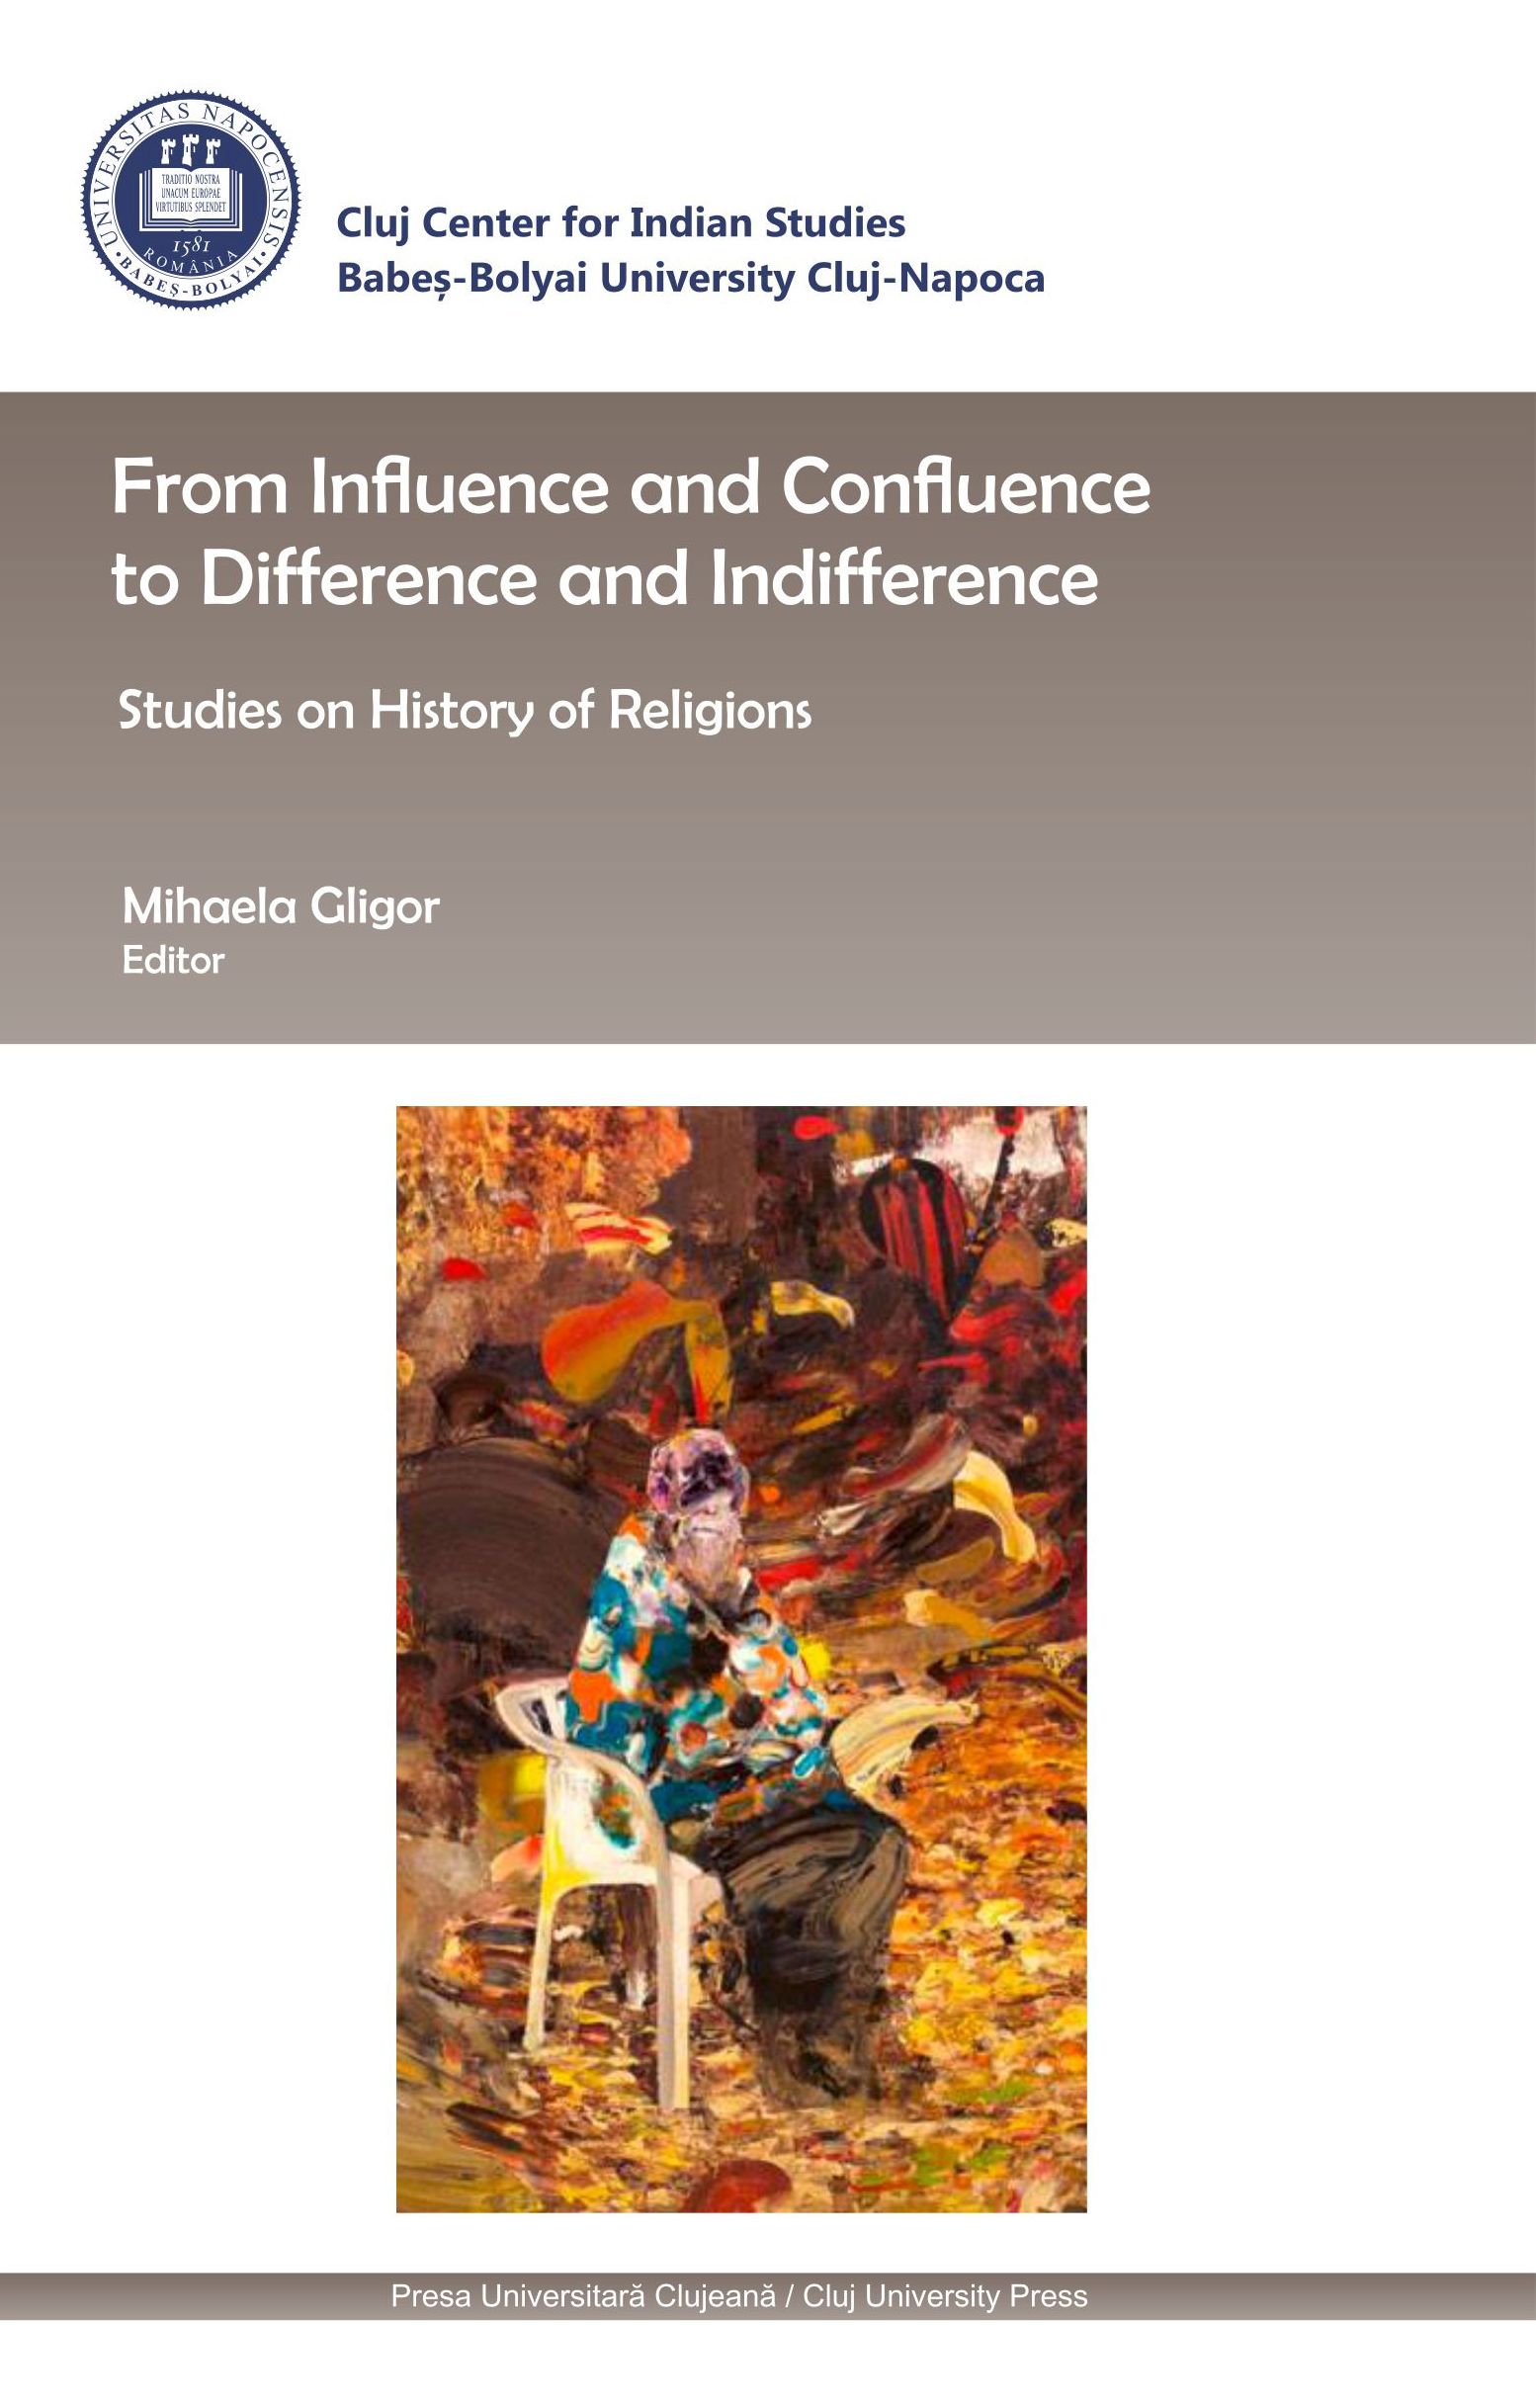 History of Religions and Cultural Fashions Revisited